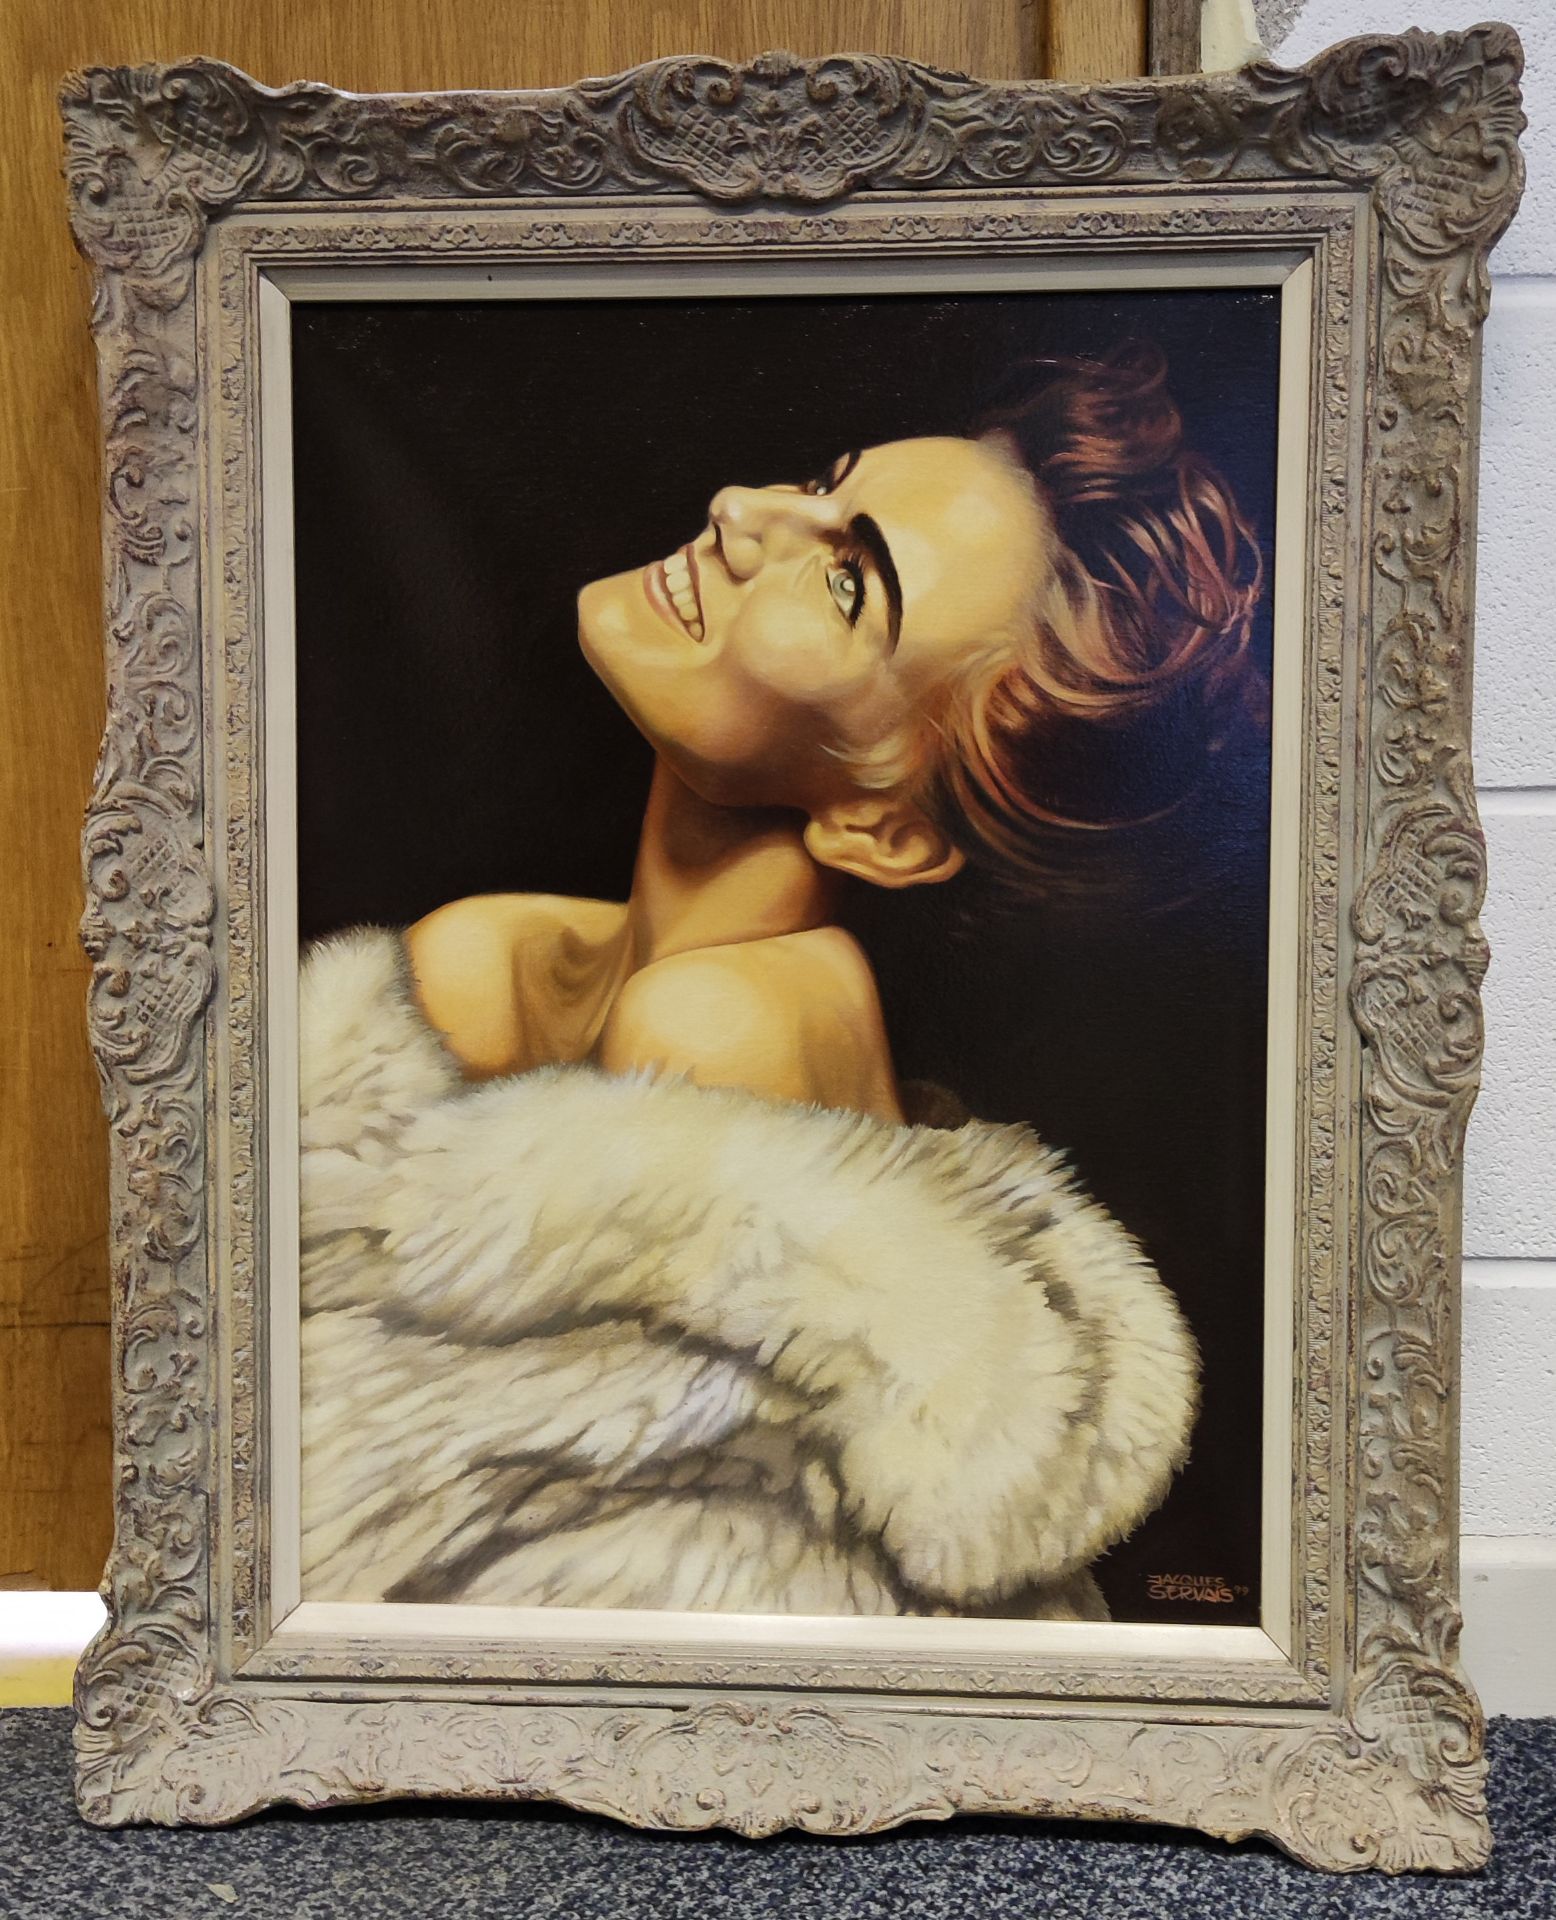 1 x Original Oil Painting On Canvas of Lady in Fur Coat by Jacques Servais - Image 2 of 10